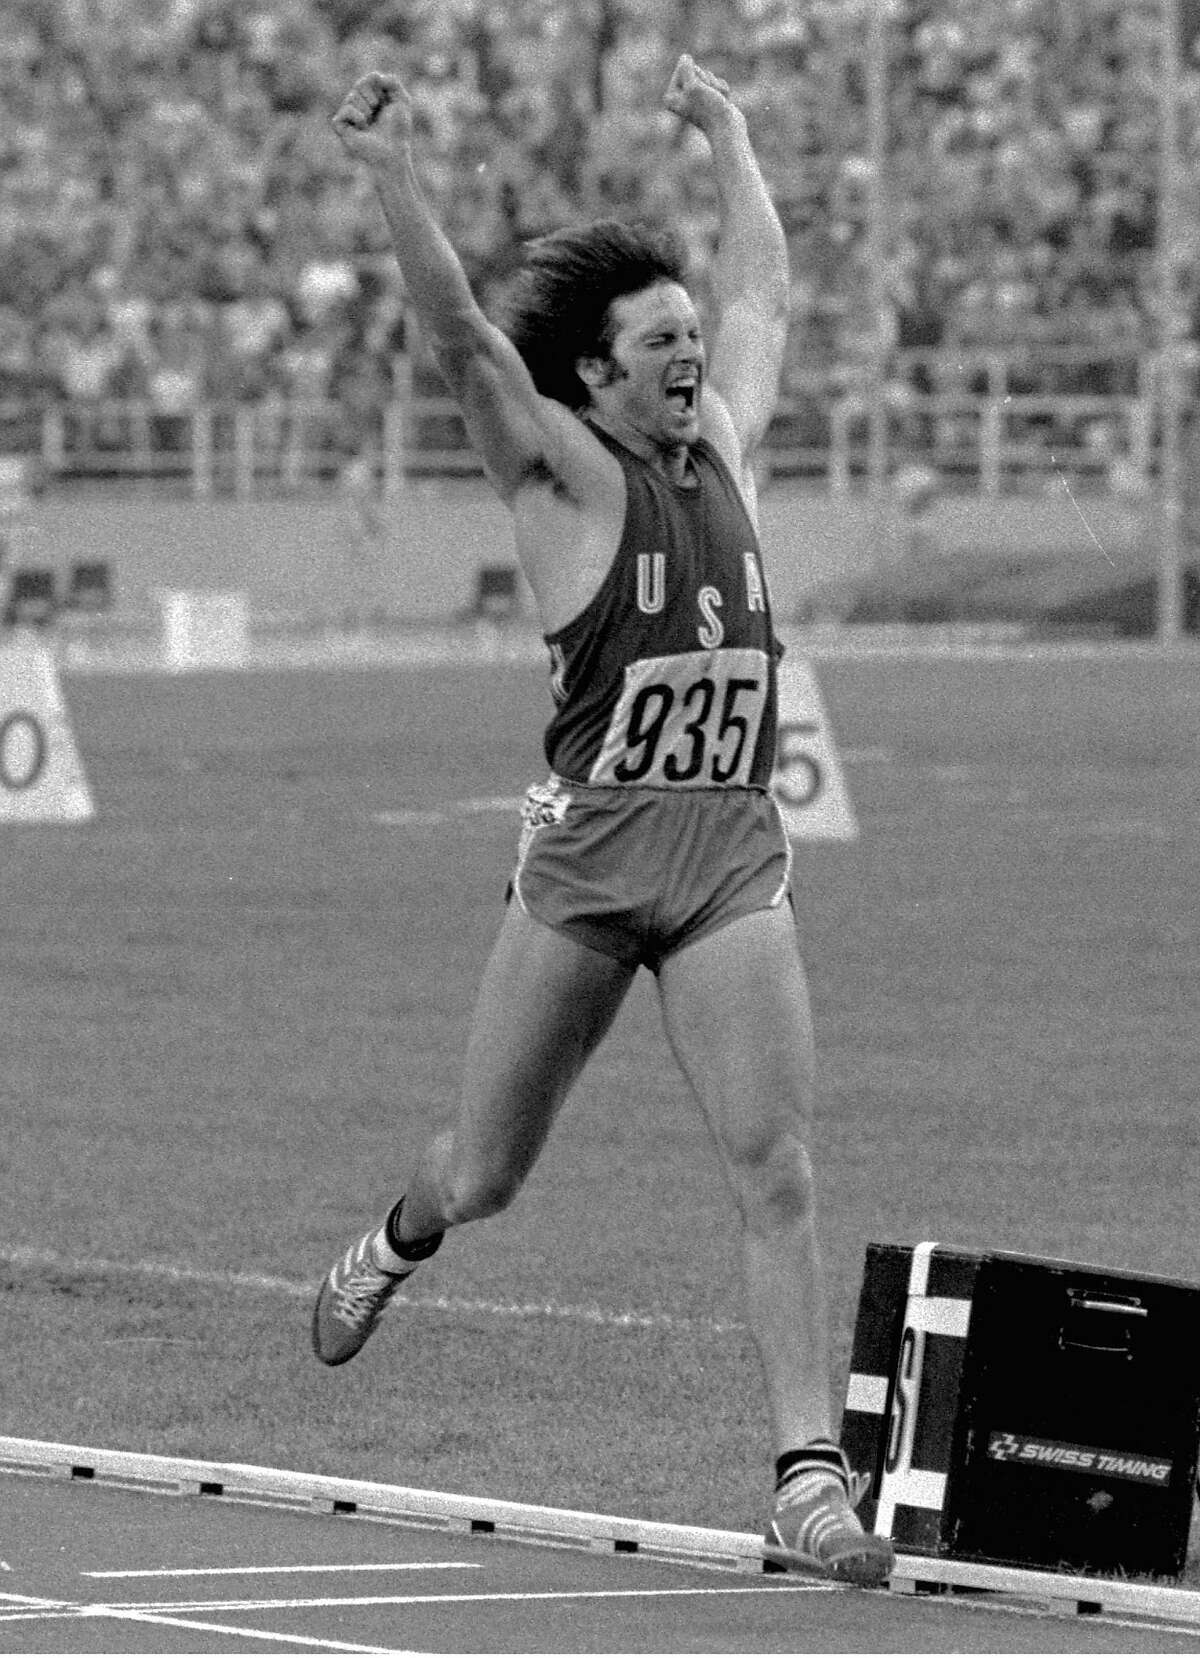 FILe- In this July 30, 1976, file photo, Bruce Jenner , of the United States, leaps in the air as he crosses the finish line in the 1,500-meter race to secure the gold medal in the decathlon at the Olympics in Montreal, Canada. Jenner made his debut as a transgender woman on the cover for the July 2015 issue of Vanity Fair. (AP Photo/File)